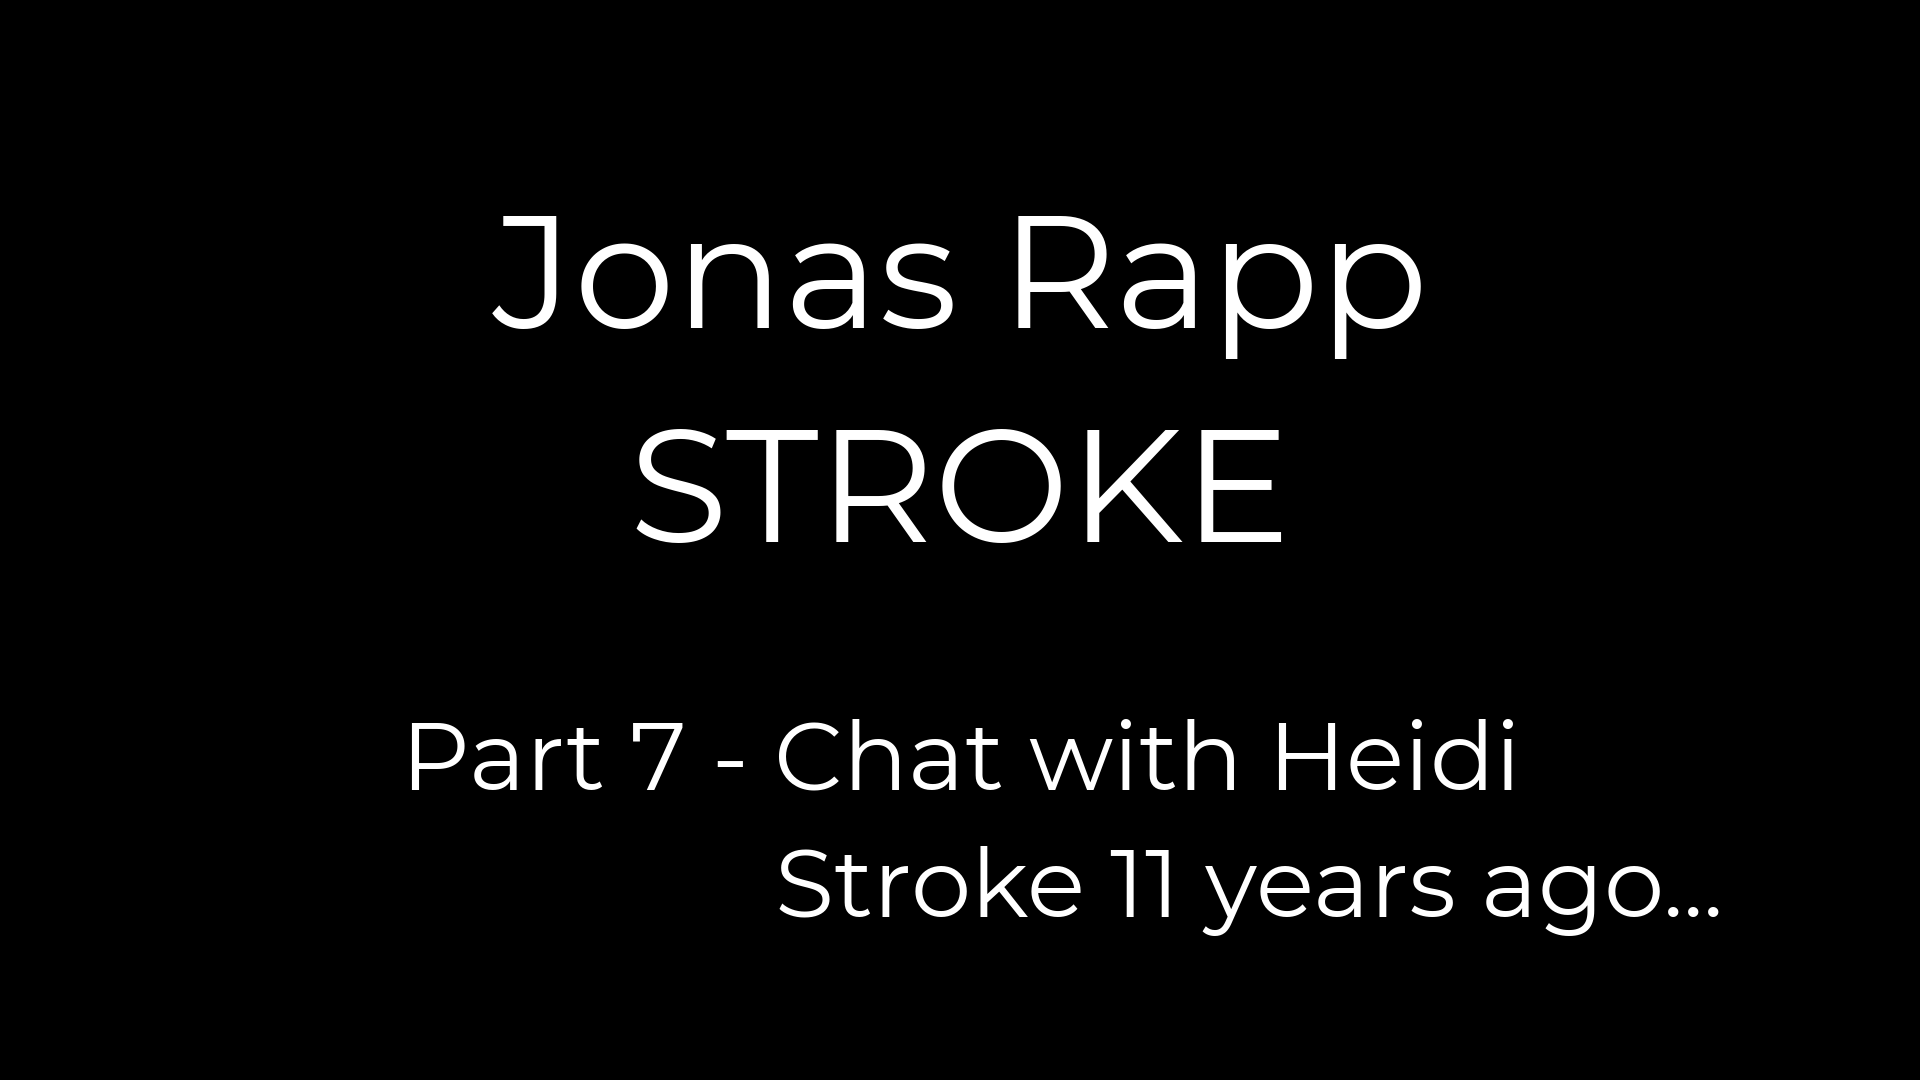 Part 7 – Chat with Heidi, 11 years of stroke